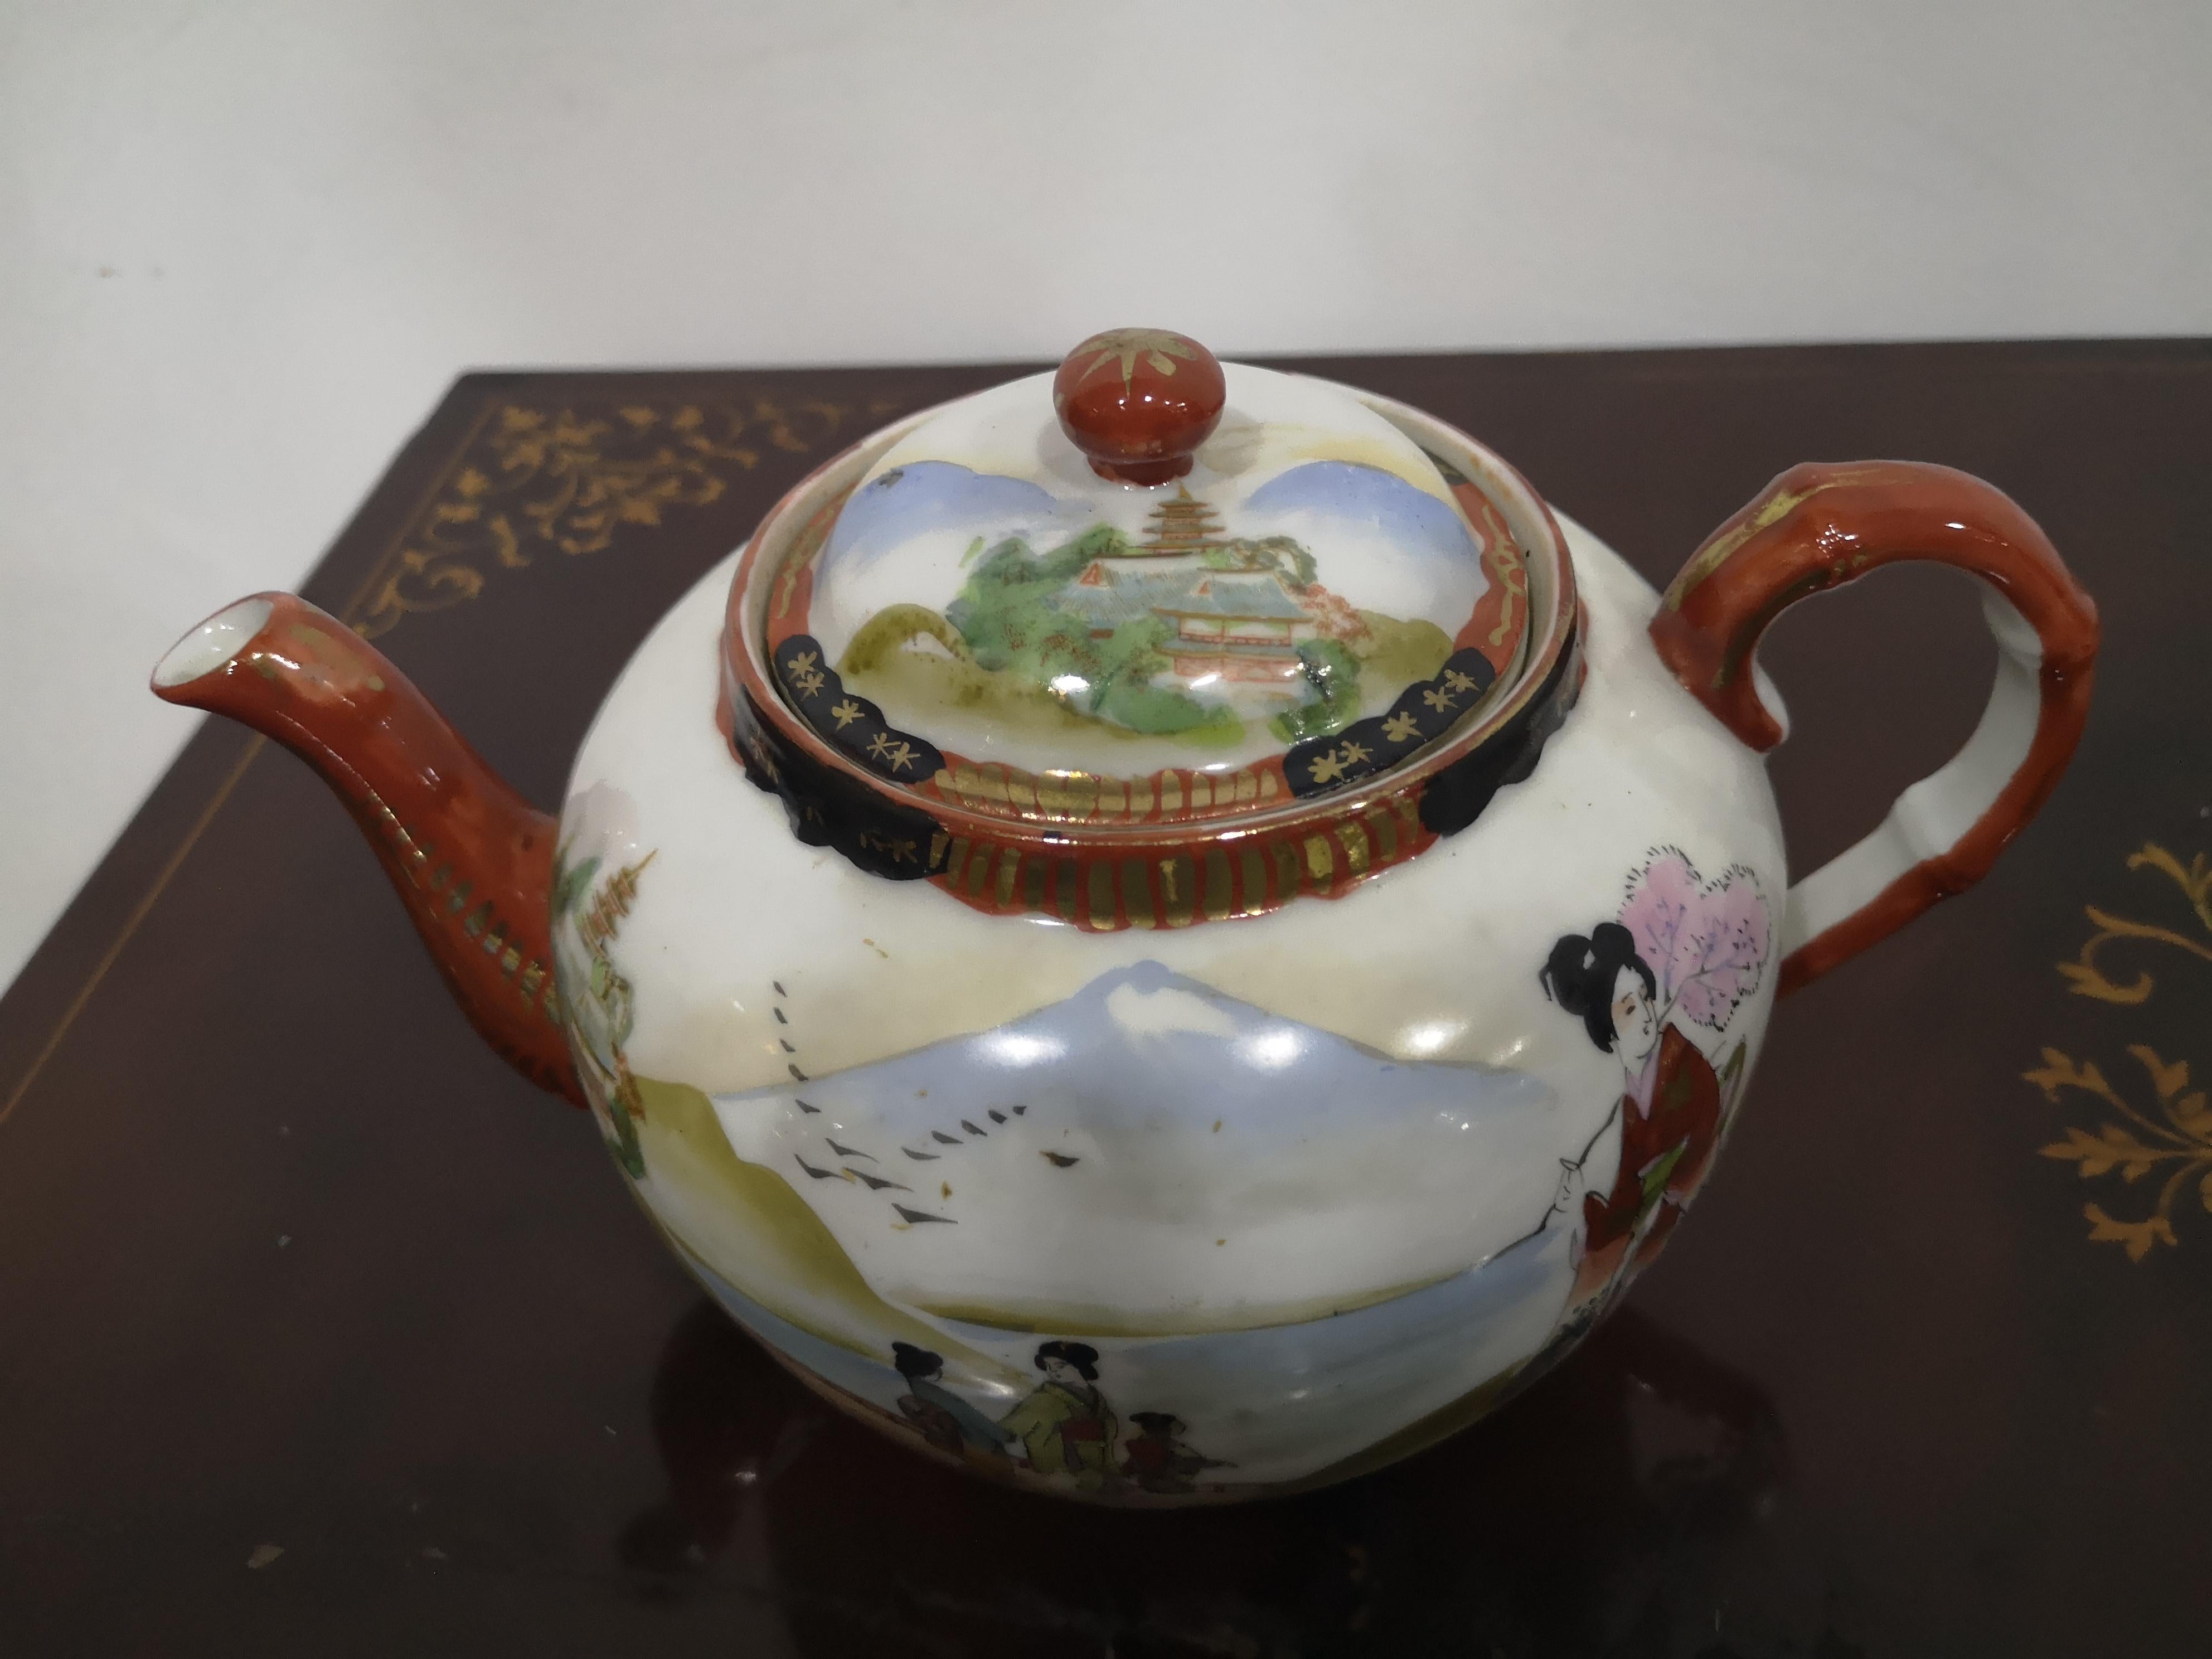 Japanese tea service for 10 in fine mid-19th century porcelain For Sale 10